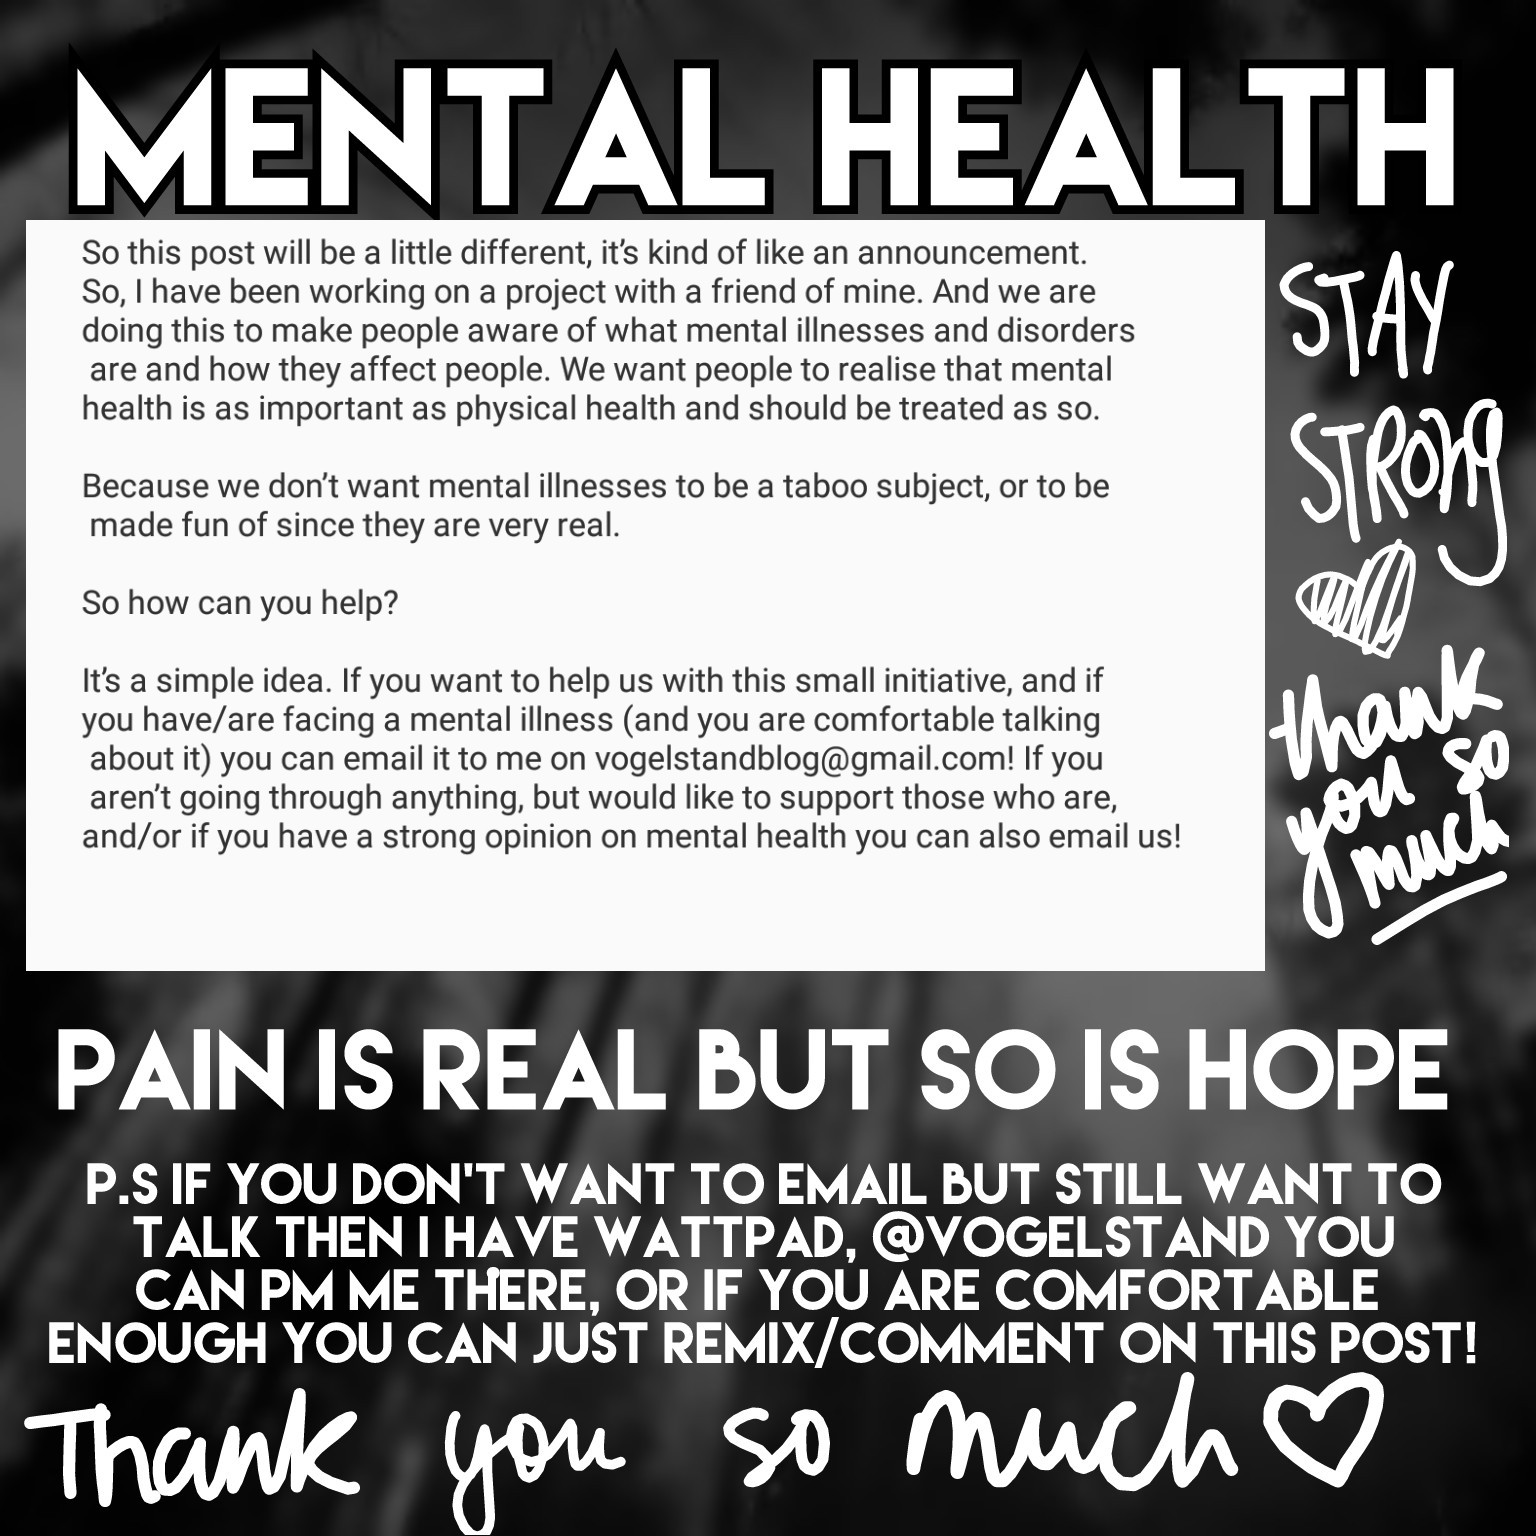 I just really want people to realise that mental health is important.